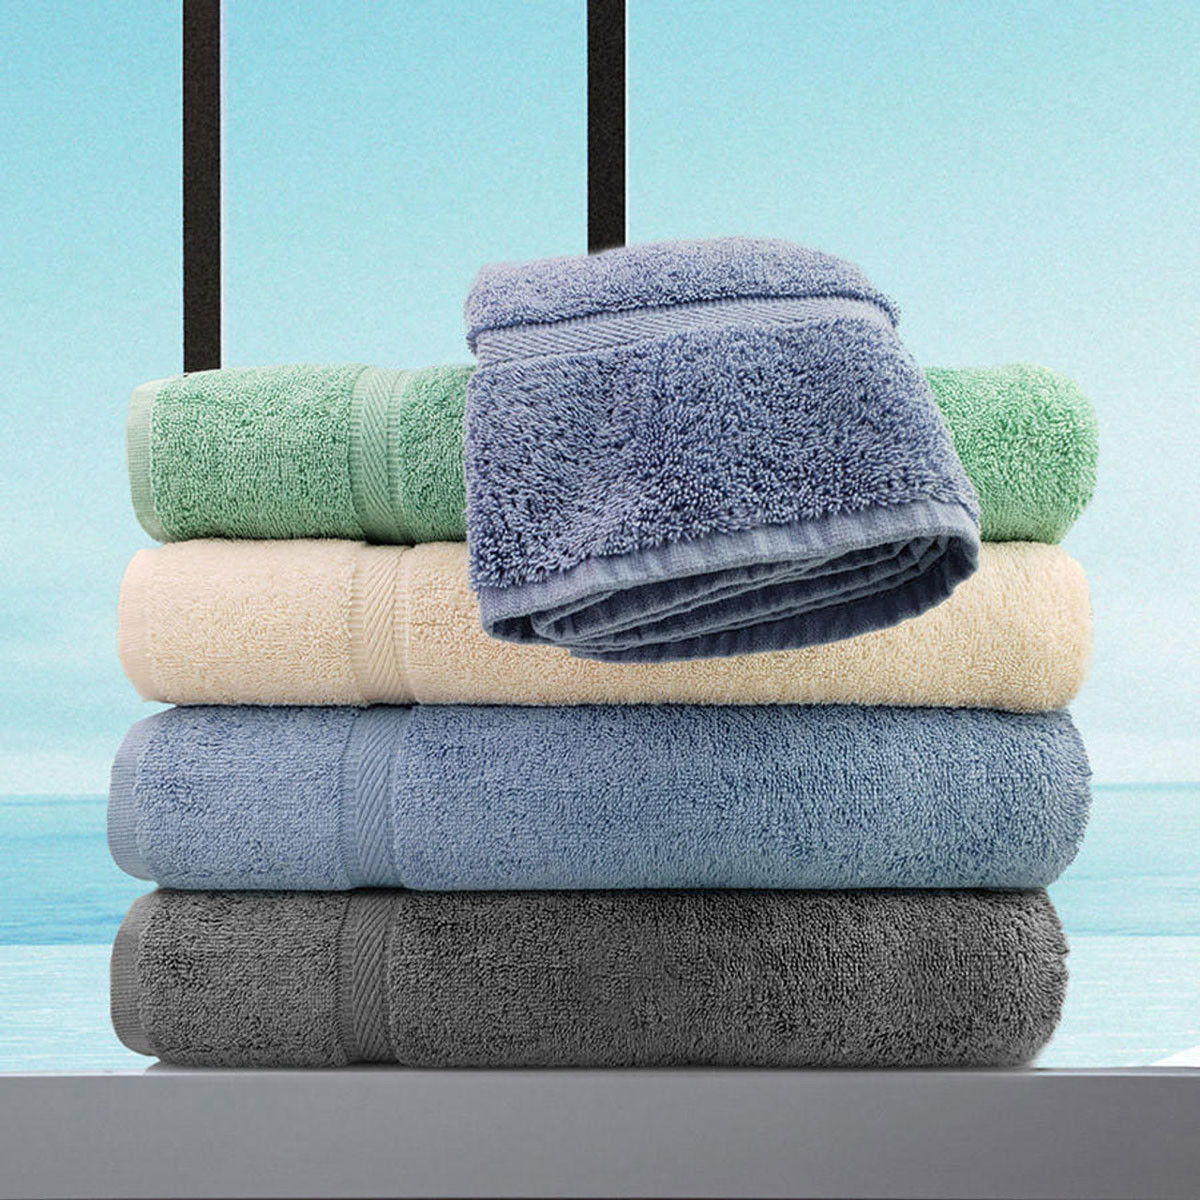 How can I fully appreciate the texture and softness of the Charcoal Grey Oxford Imperiale Towels?